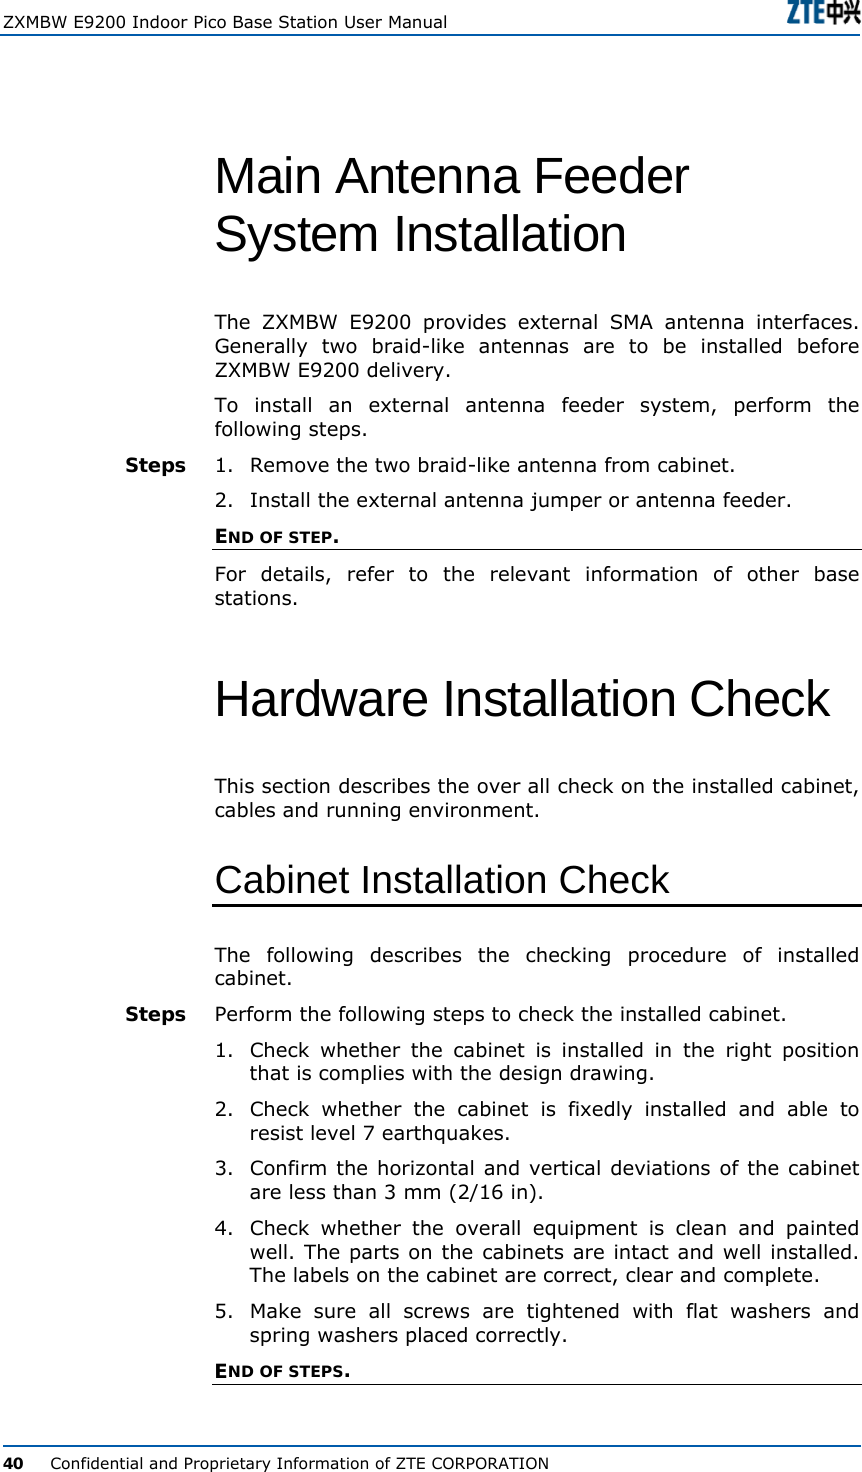  ZXMBW E9200 Indoor Pico Base Station User Manual   40      Confidential and Proprietary Information of ZTE CORPORATION Main Antenna Feeder System Installation  The ZXMBW E9200 provides external SMA antenna interfaces. Generally two braid-like antennas are to be installed before ZXMBW E9200 delivery.  To install an external antenna feeder system, perform the following steps. 1.  Remove the two braid-like antenna from cabinet. 2.  Install the external antenna jumper or antenna feeder.  END OF STEP. For details, refer to the relevant information of other base stations. Hardware Installation Check  This section describes the over all check on the installed cabinet, cables and running environment. Cabinet Installation Check The following describes the checking procedure of installed cabinet. Perform the following steps to check the installed cabinet. 1.  Check whether the cabinet is installed in the right position that is complies with the design drawing.  2.  Check whether the cabinet is fixedly installed and able to resist level 7 earthquakes.  3.  Confirm the horizontal and vertical deviations of the cabinet are less than 3 mm (2/16 in).  4.  Check whether the overall equipment is clean and painted well. The parts on the cabinets are intact and well installed. The labels on the cabinet are correct, clear and complete.  5.  Make sure all screws are tightened with flat washers and spring washers placed correctly. END OF STEPS. Steps Steps 